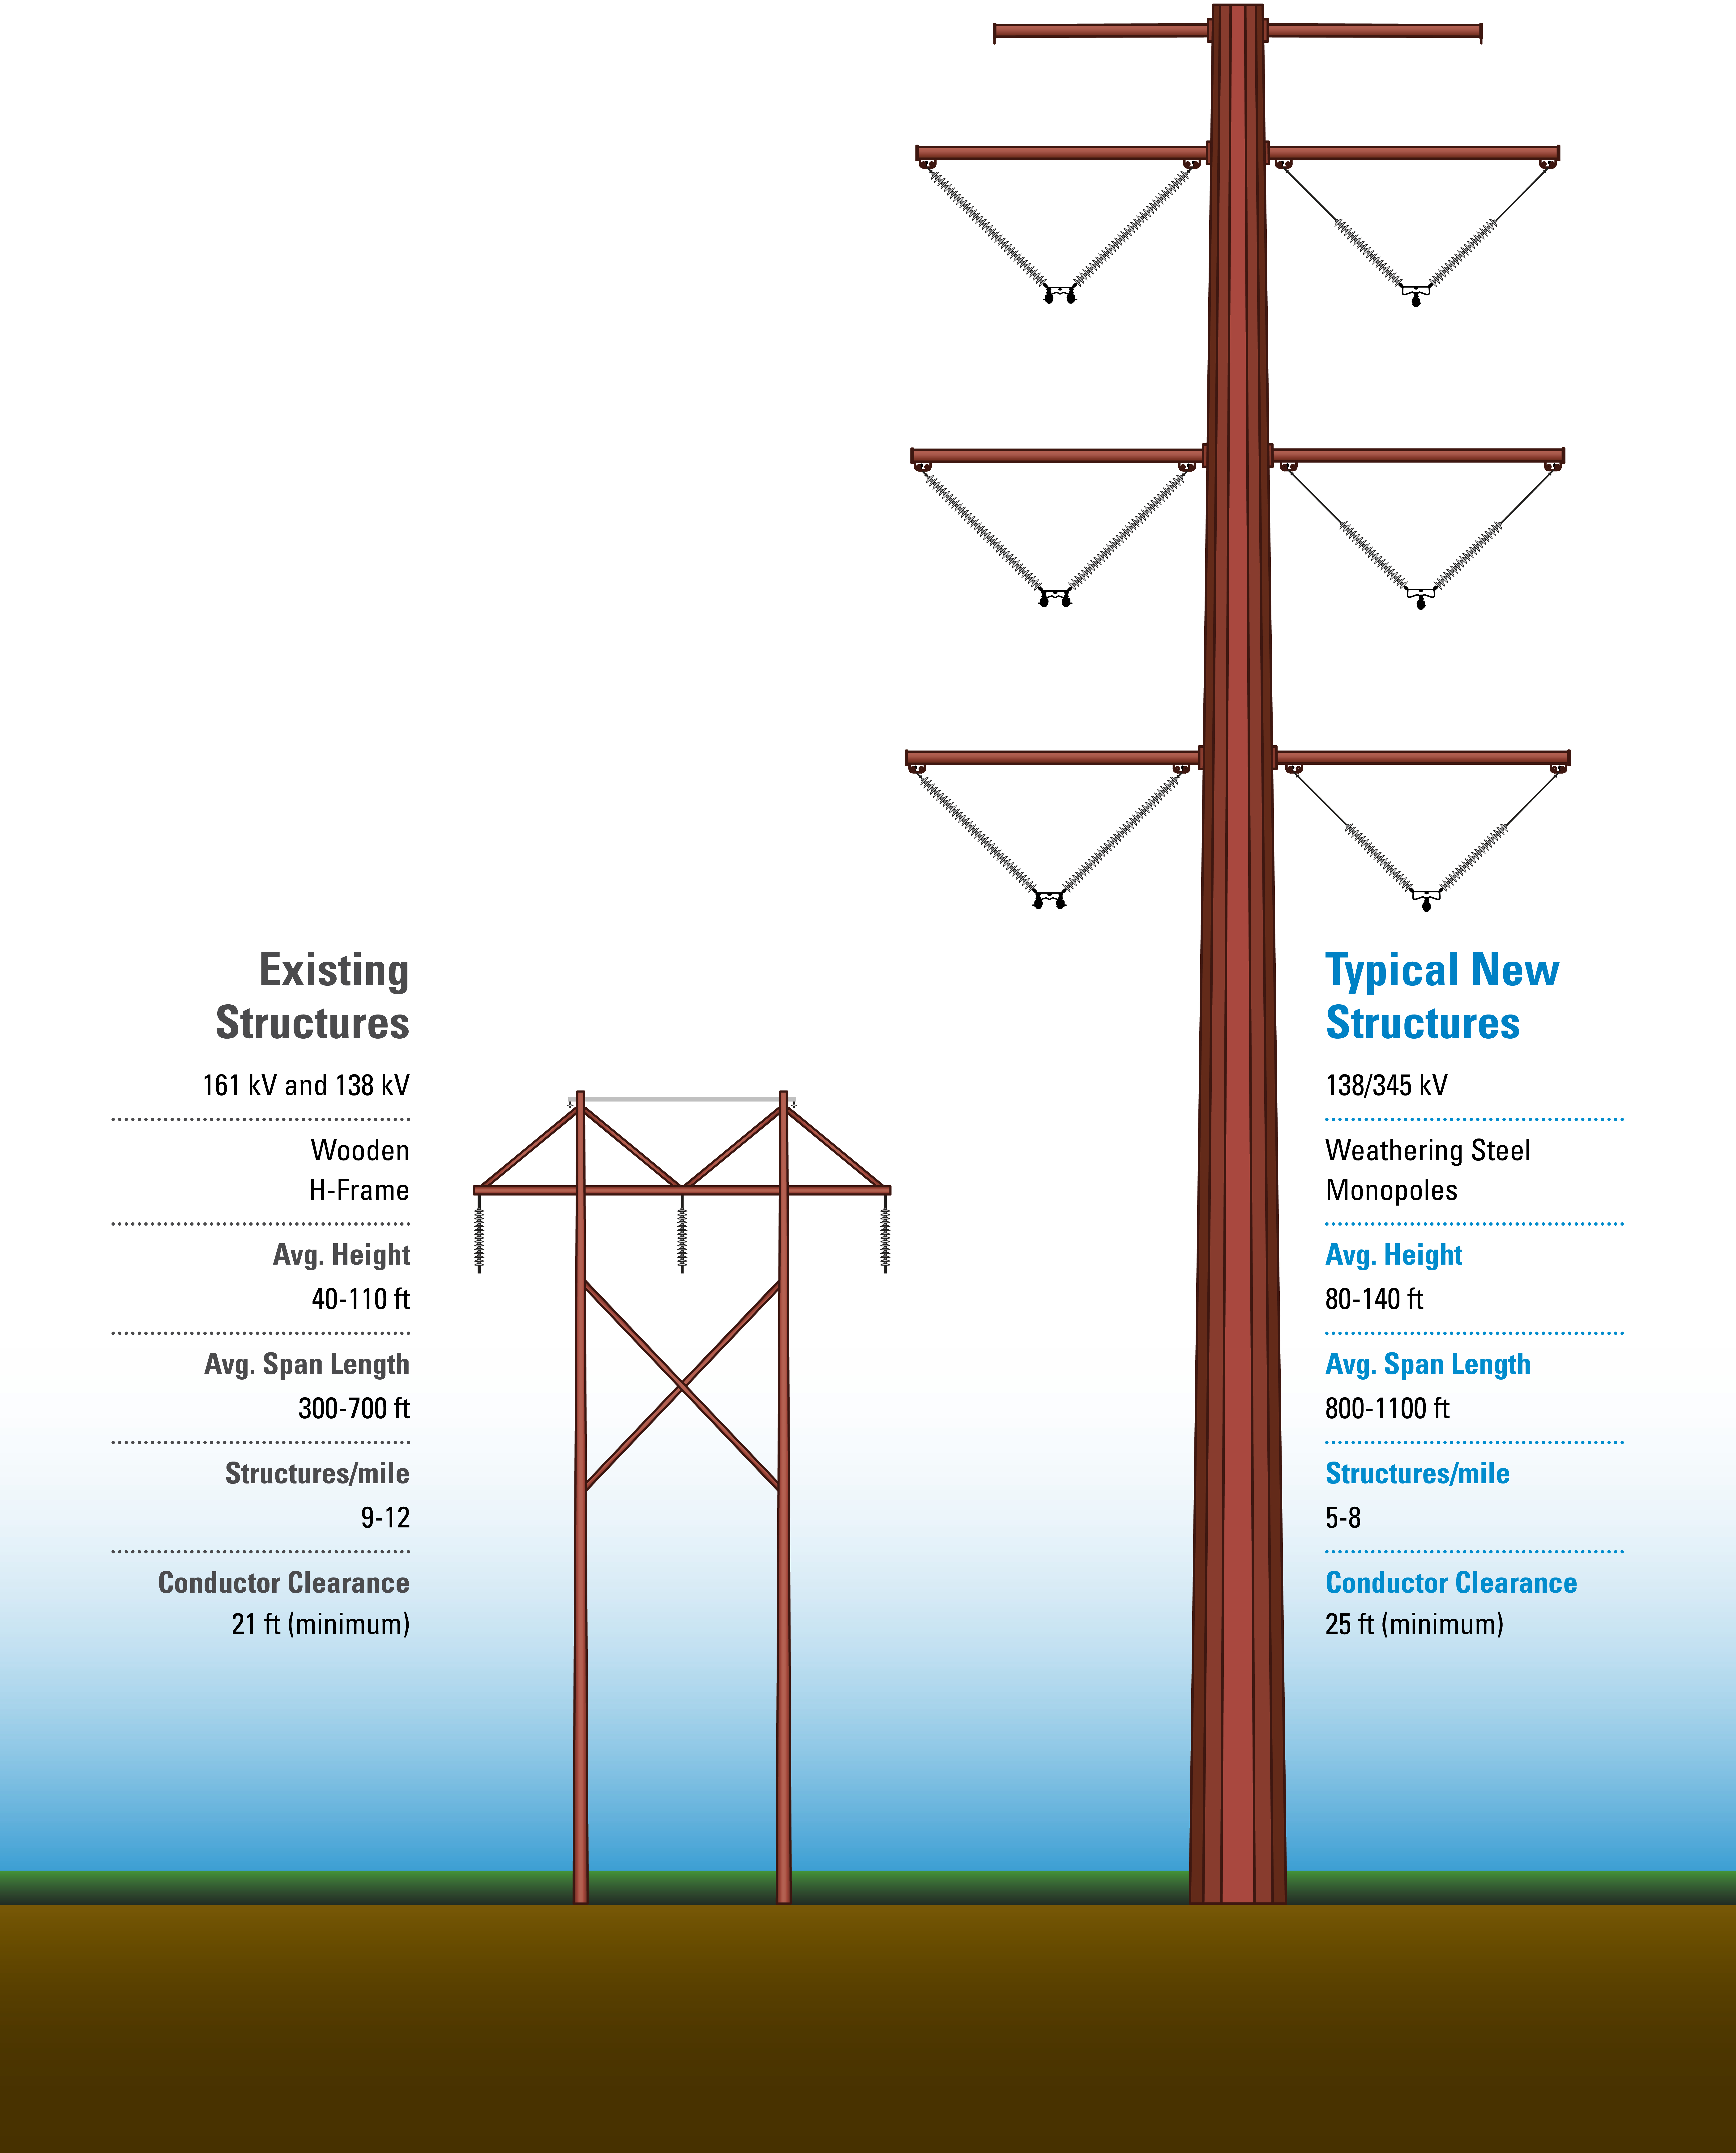 Two side by side structure graphics showing the existing structures and anticipated new structures for the county. Graphics are intended for information purposes only and are not to scale. New structure designs, including number of arms and type of foundation may vary depending on final route, soil conditions, circuit design, and presence of distribution.  

                                                  Graphic 1 shows the existing 161 kV/138 kV wooden H-frame, with an average height of 40-80ft; average span length between 100-500ft. Structures per mile averages between 9-12 miles with a conductor clearance of 21ft minimum. 
                                                  
                                                  Graphic 2 shows the anticipated new structure as a 138/345 kV weathering steel monopole with an average height of 80-140ft and average span length between 800-1100 ft. Structures per mile averages between 5-8 miles with a conductor clearance of 25ft minimum.